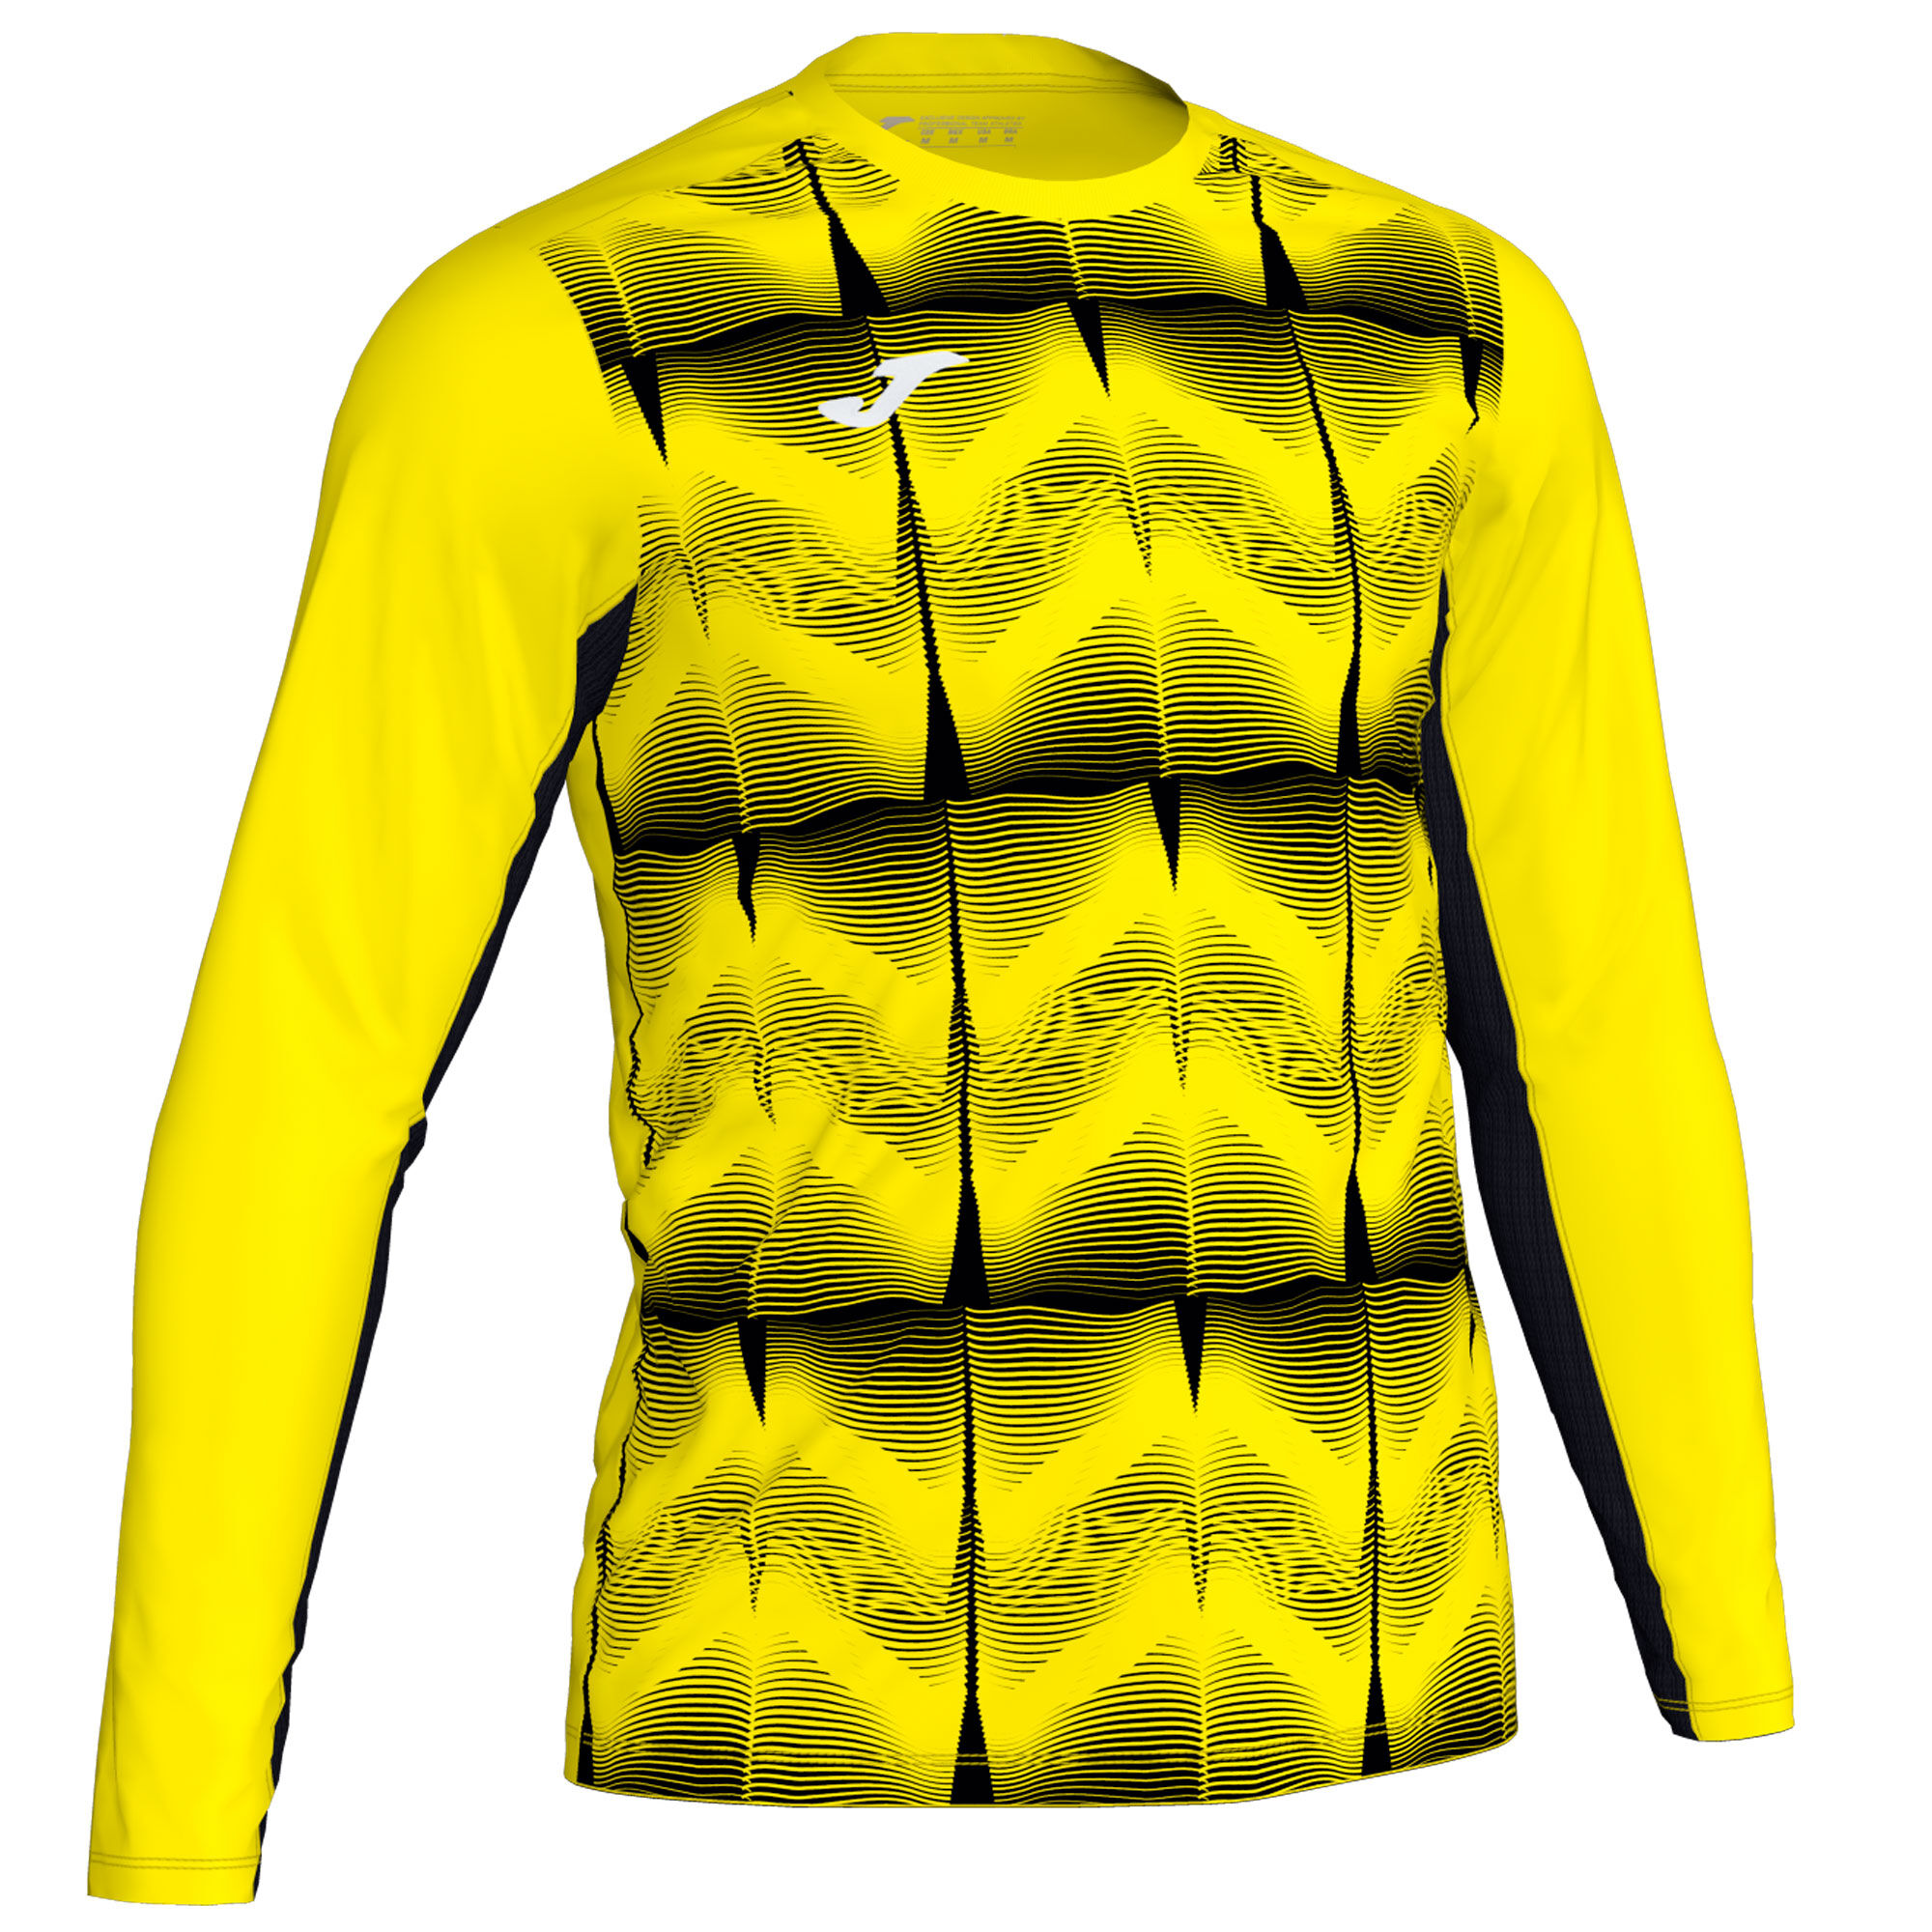 MAILLOT MANCHES LONGUES HOMME PORTERO DERBY IV JAUNE FLUO